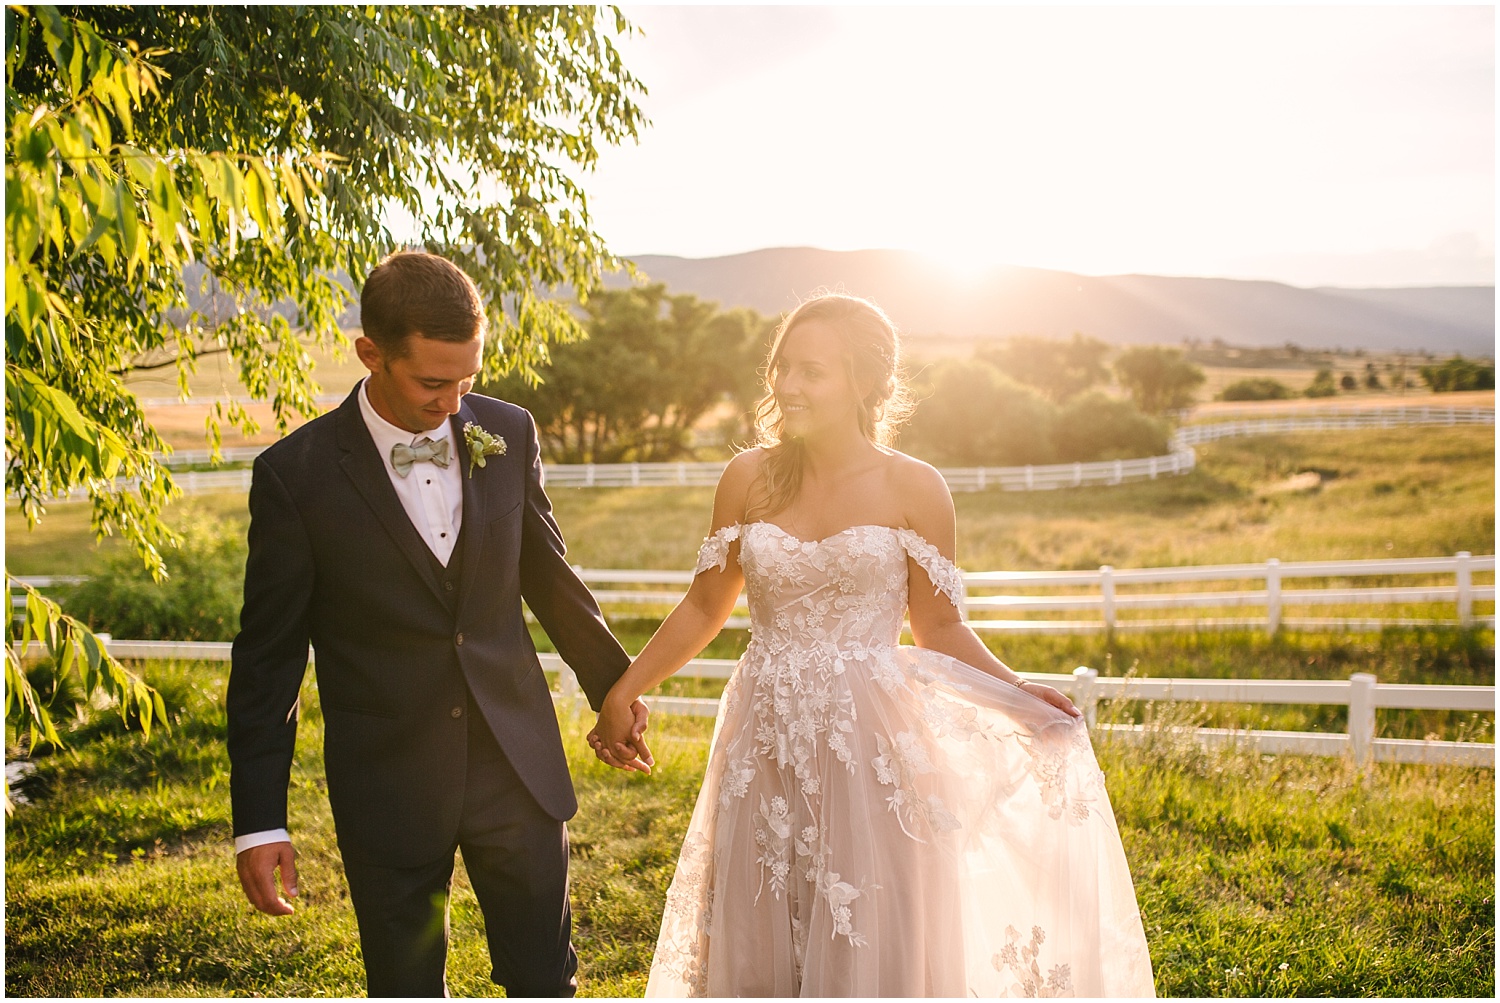 Bride and groom walking through fields at Crooked Willow Farms at golden hour